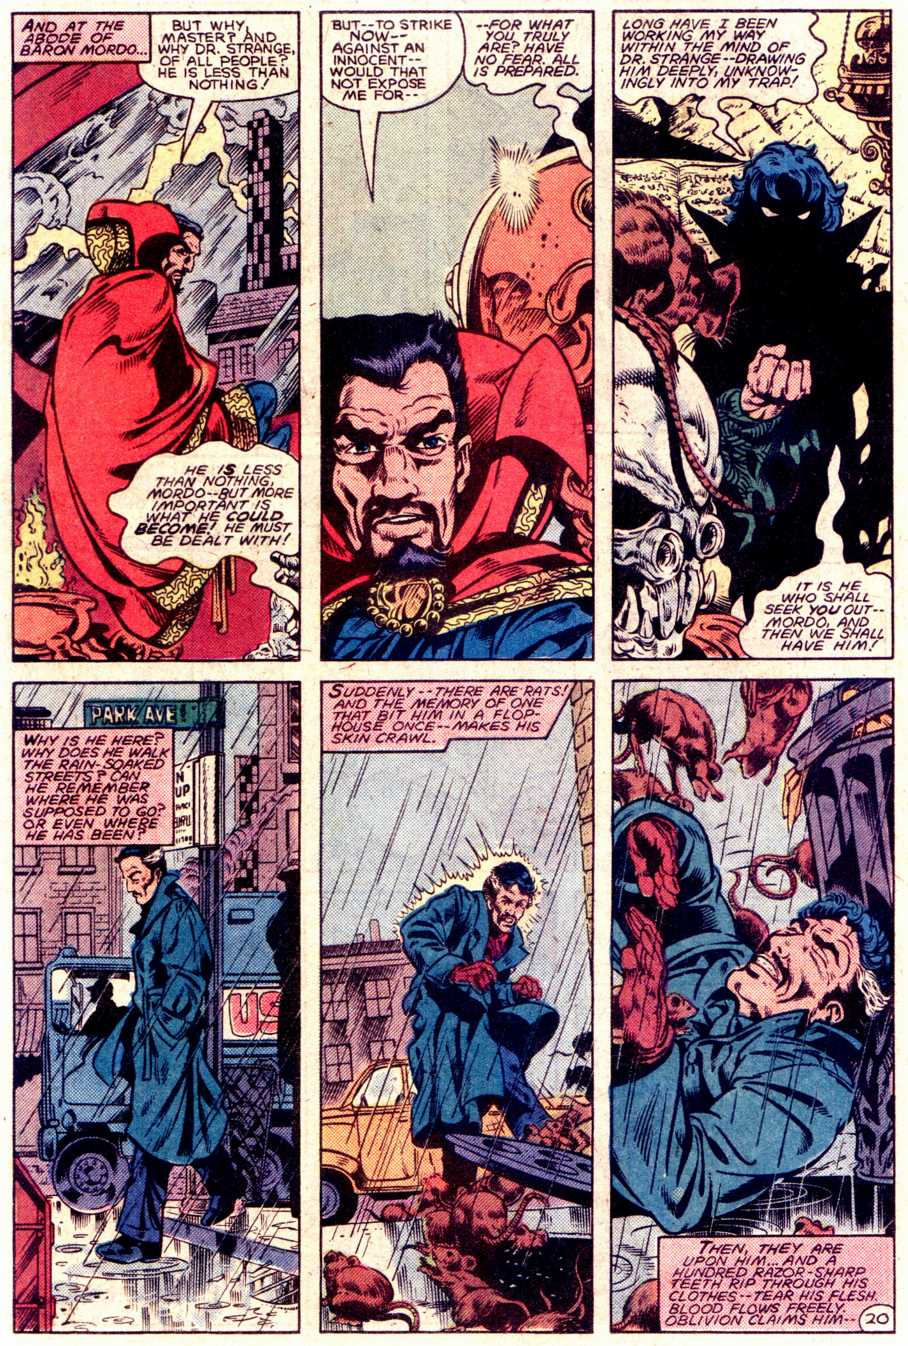 What If? (1977) issue 40 - Dr Strange had not become master of The mystic arts - Page 21